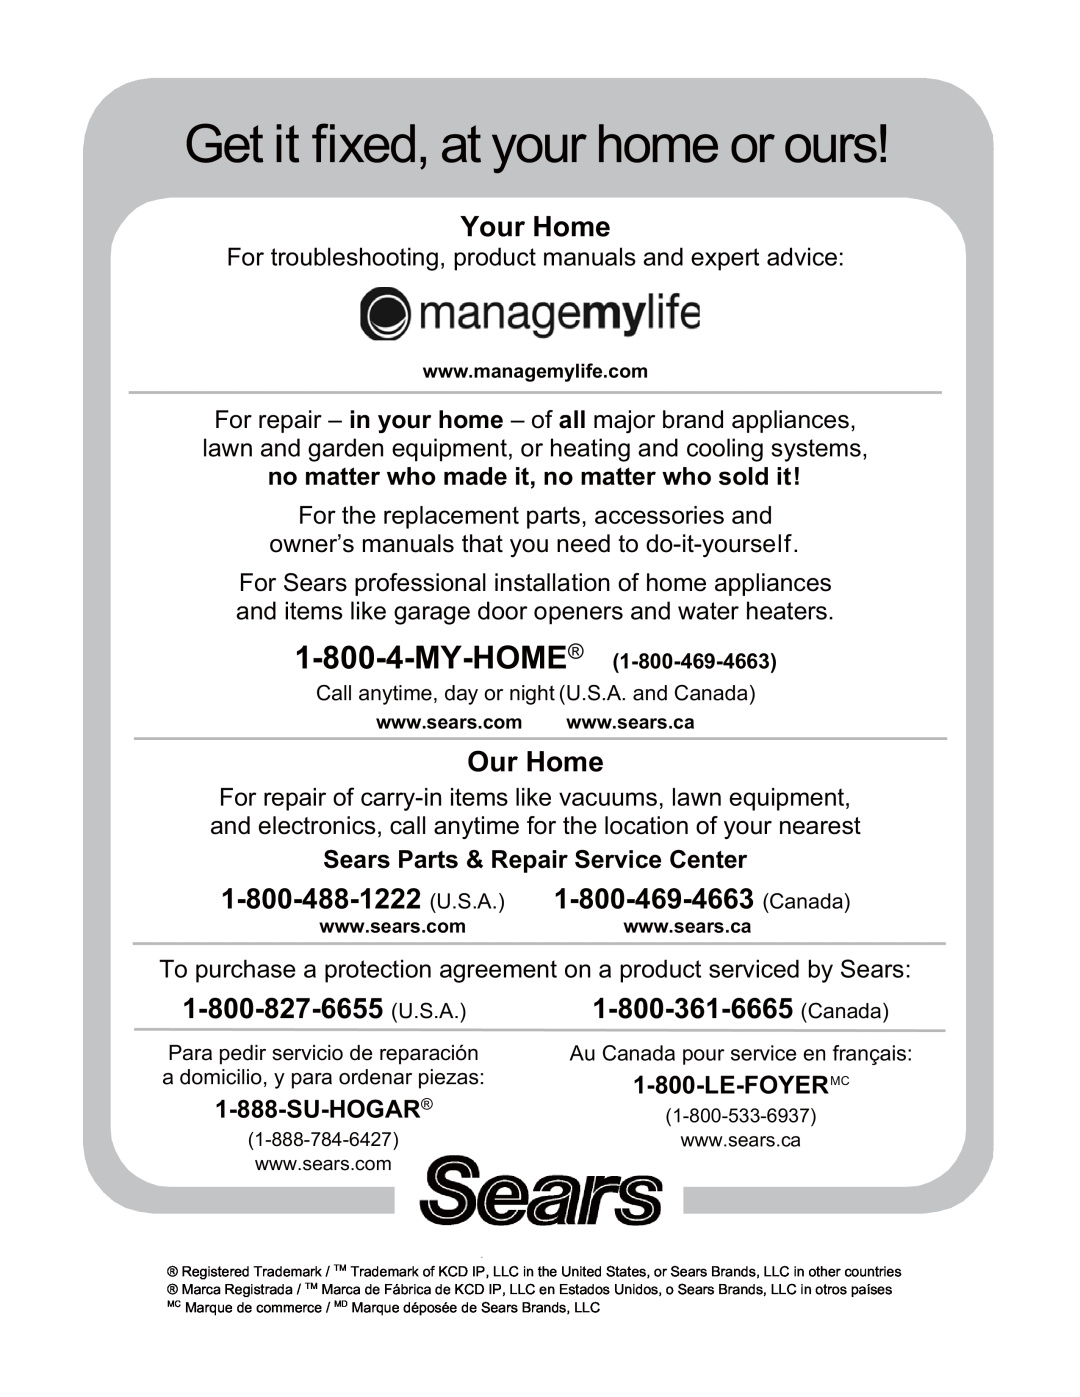 Sears 138.745 manual Get it fixed, at your home or ours, Your Home, Our Home, Sears Parts & Repair Service Center, Su-Hogar 